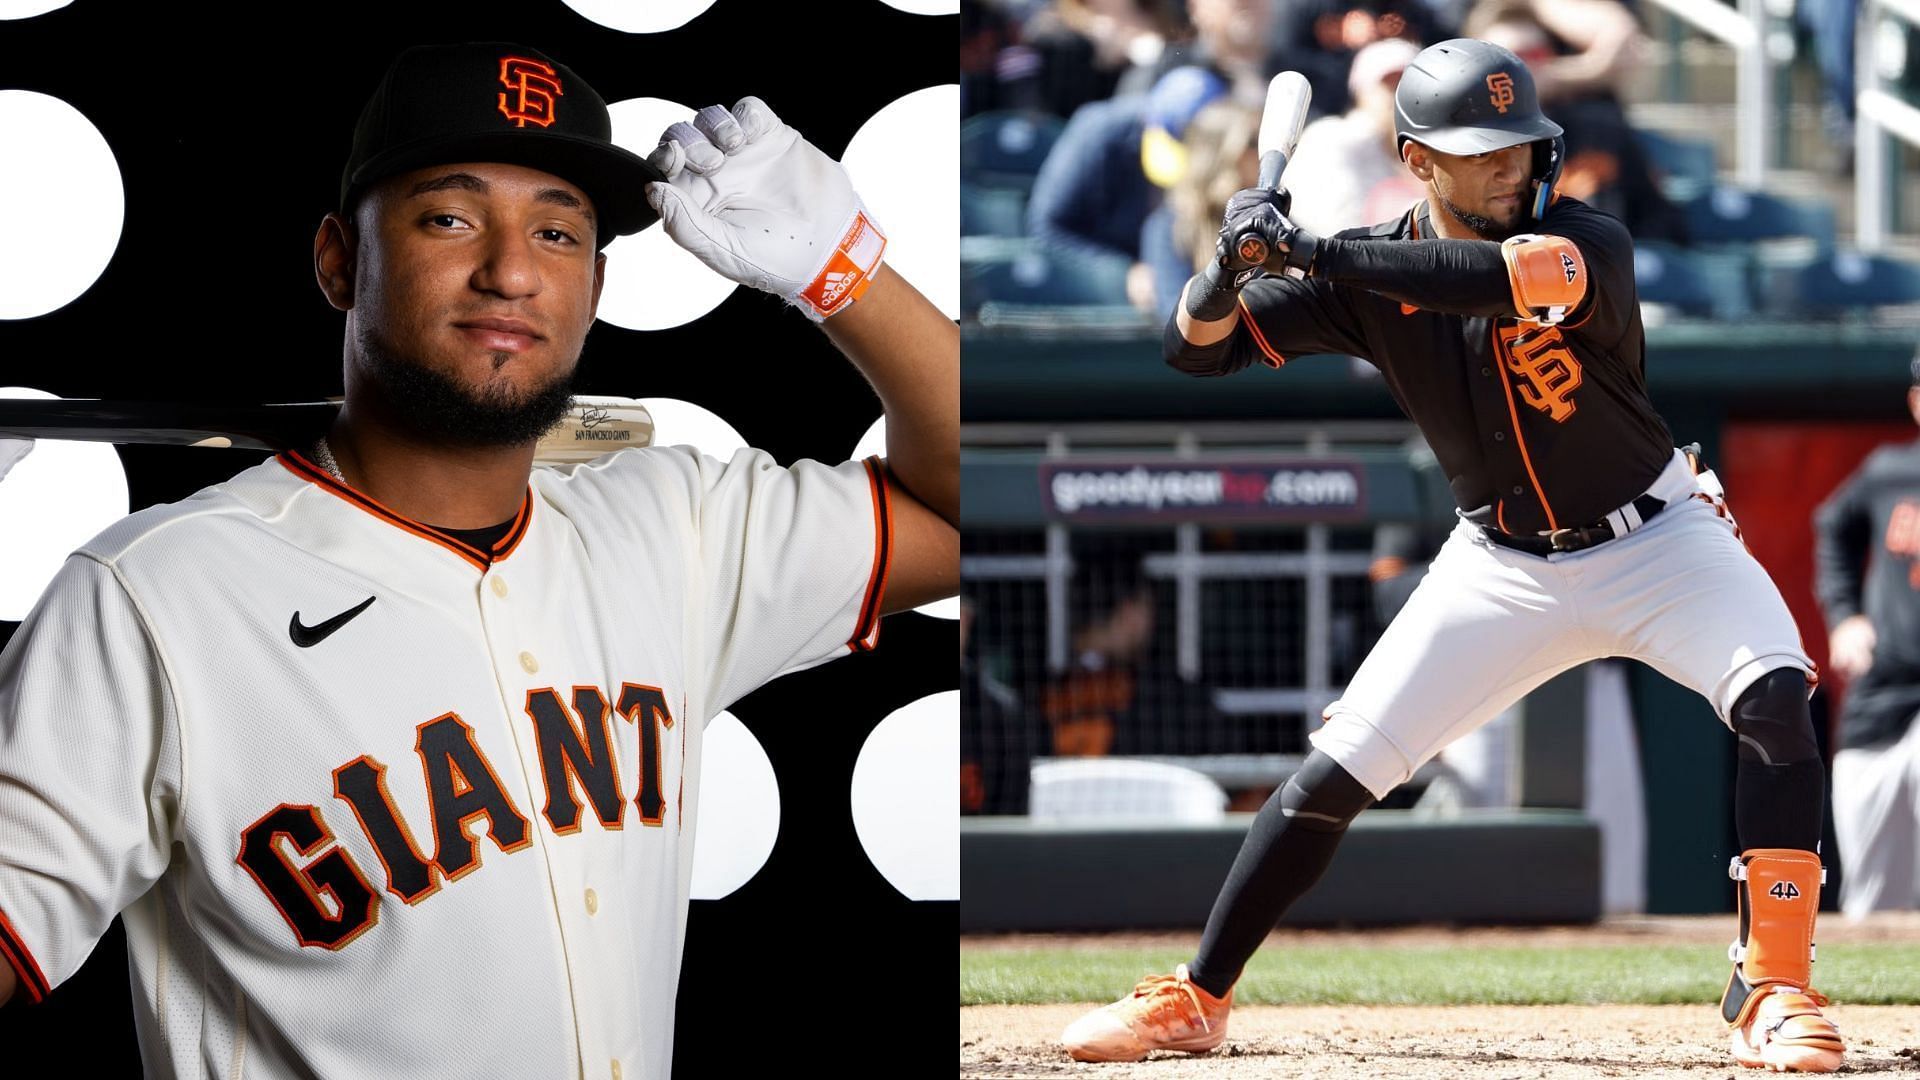 Mitch Haniger's injury means arrival of Giants top prospect Luis Matos -  The Athletic